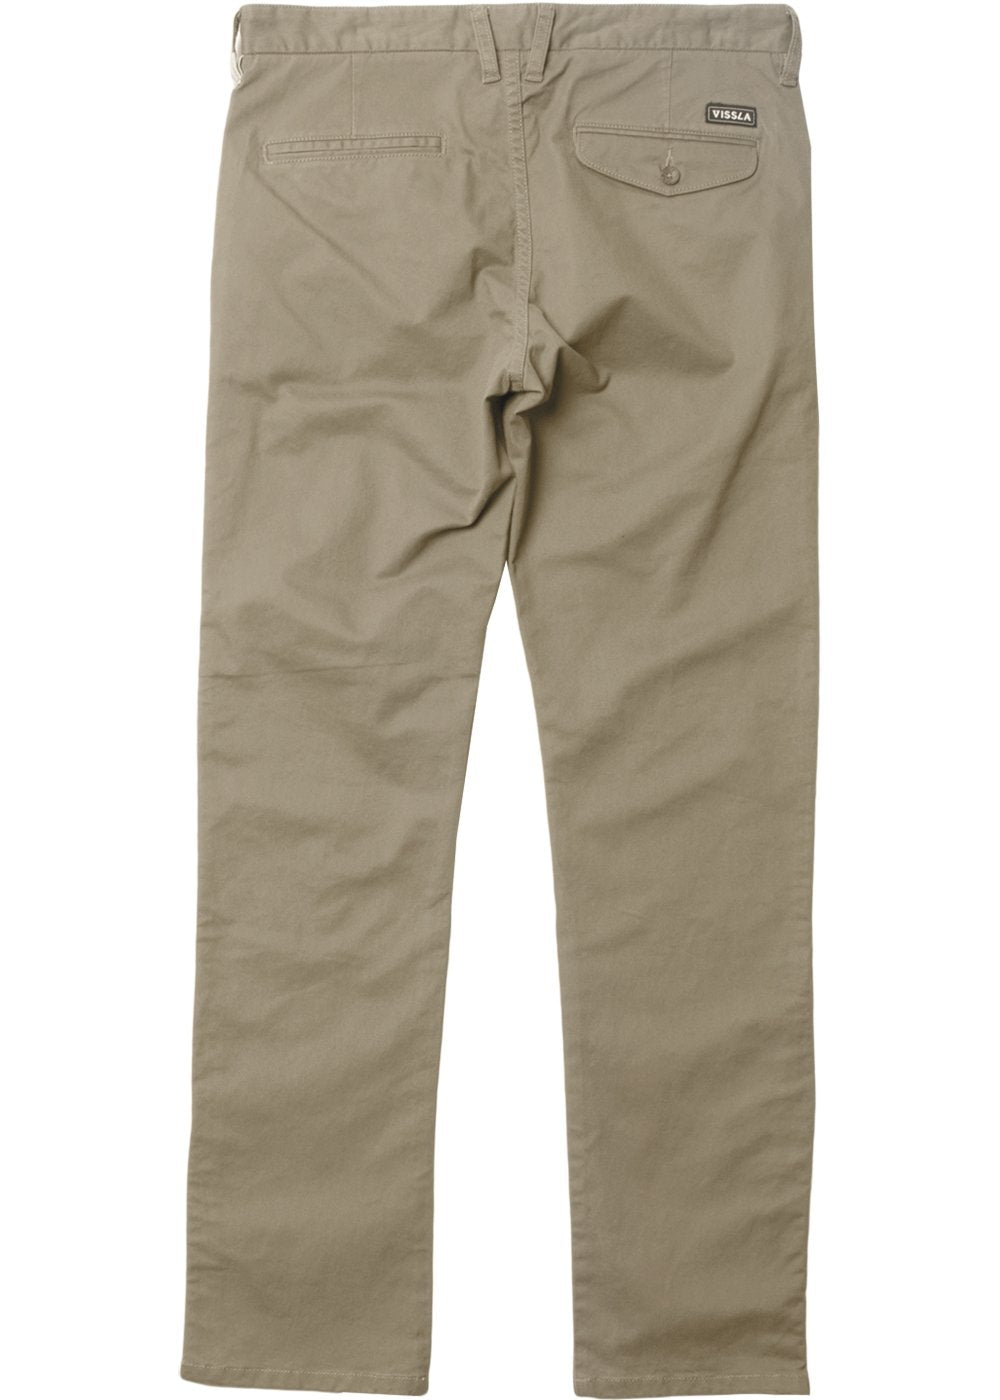 Low Tide Chino Eco Pant.